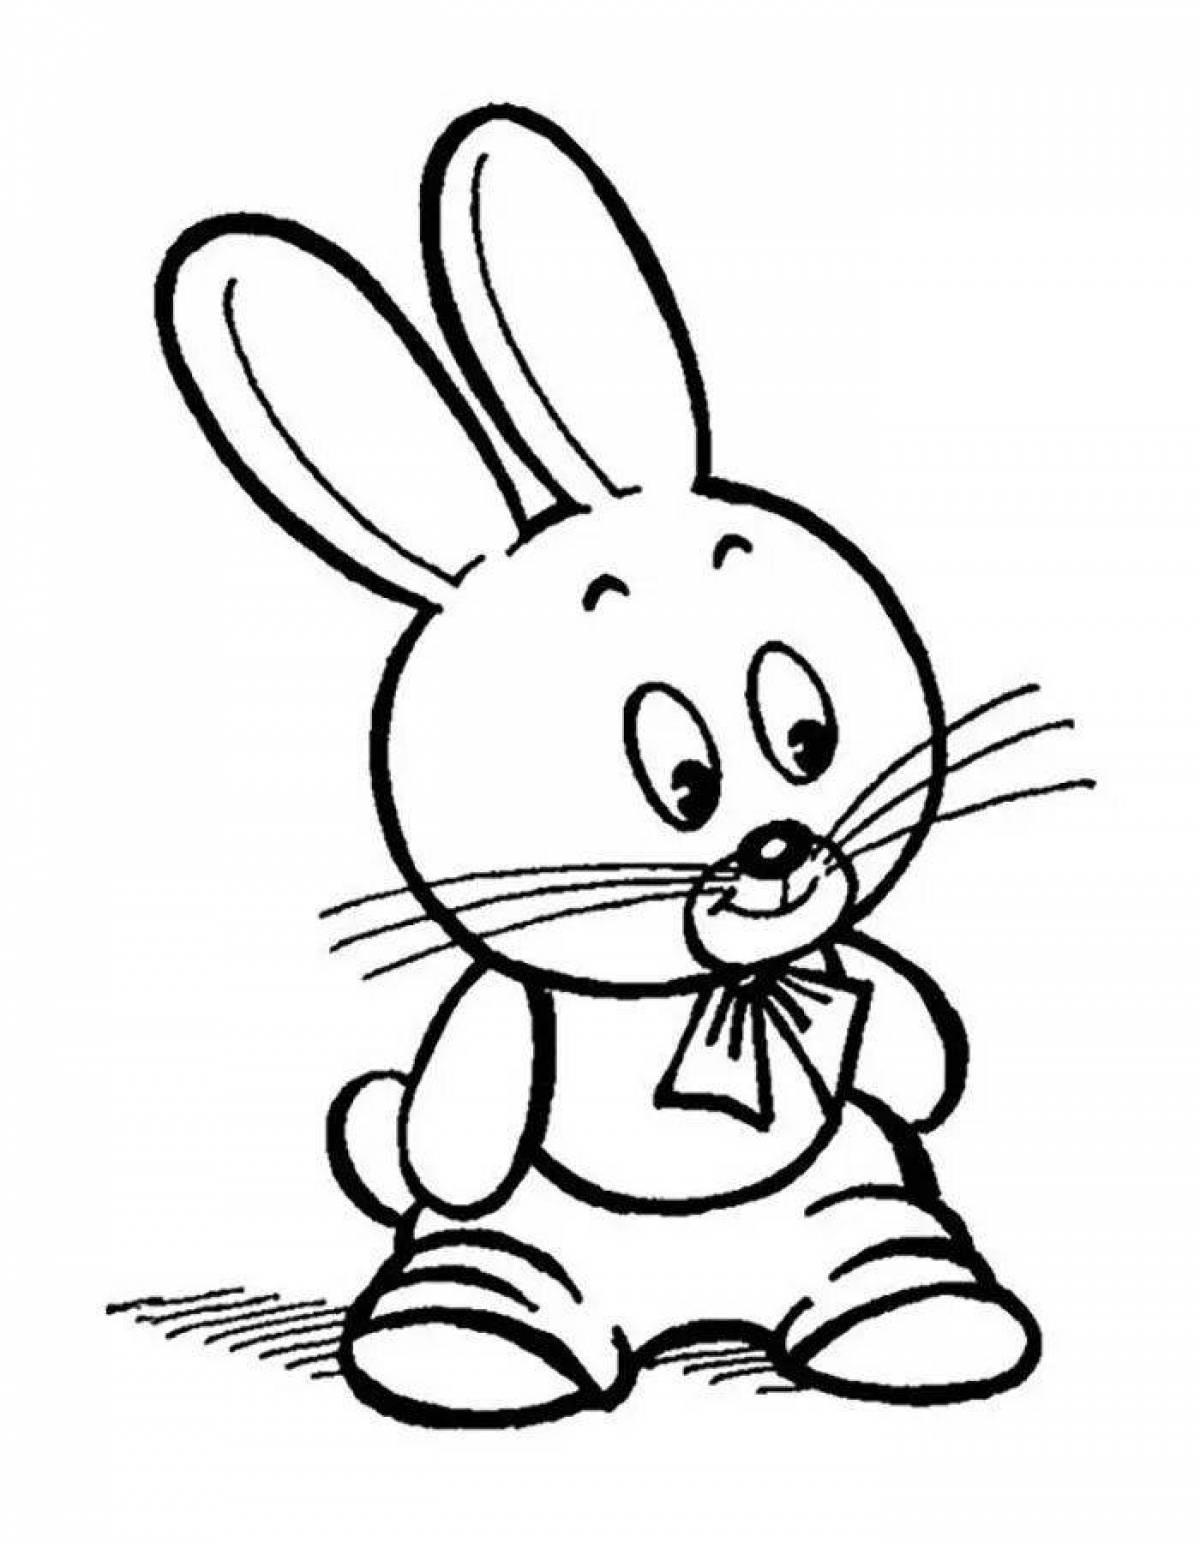 Fancy bunny coloring pages